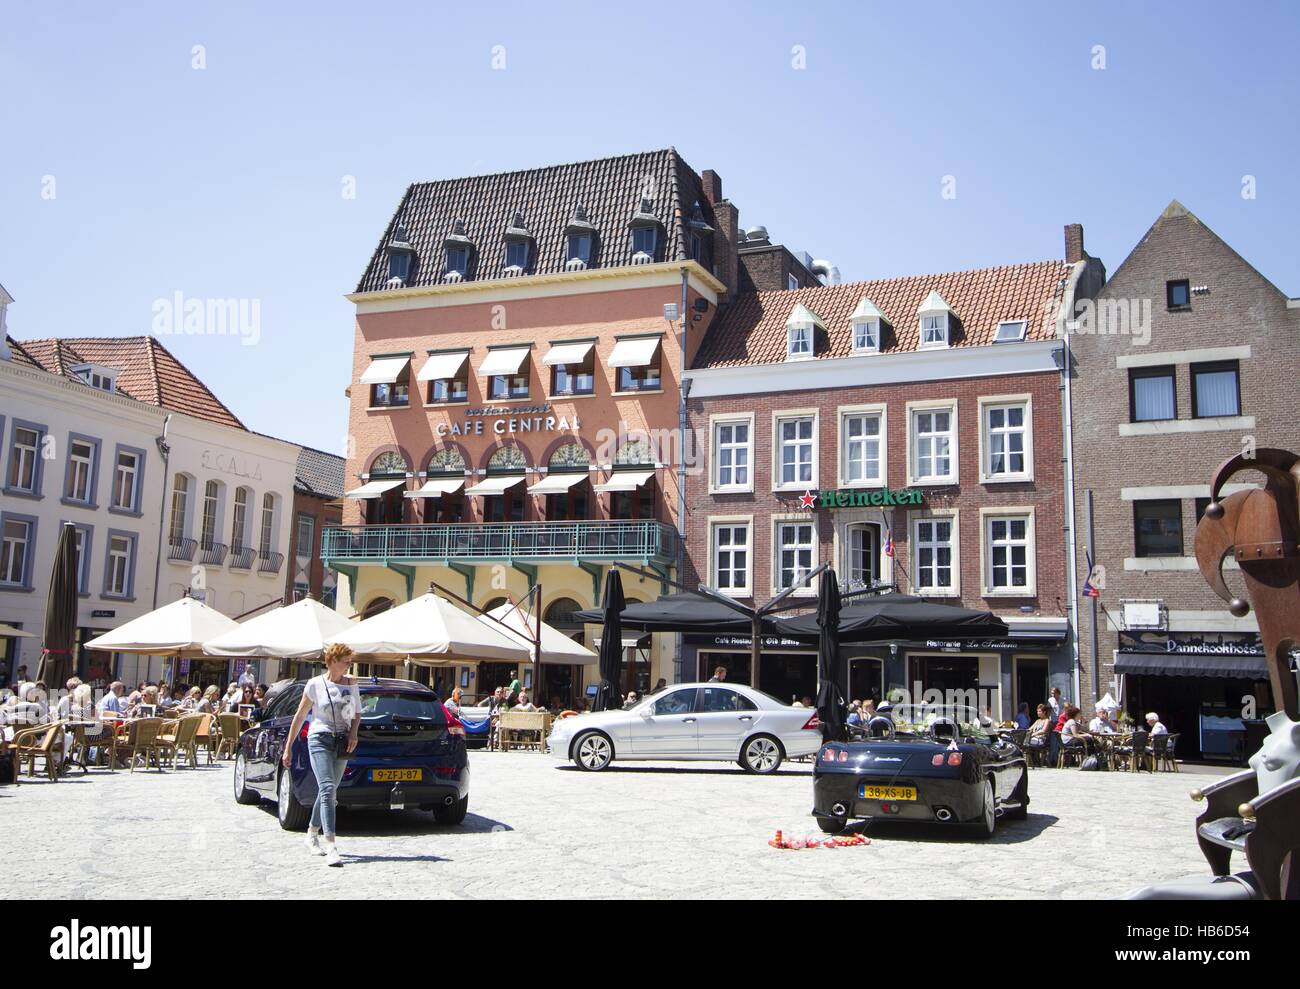 Gemeente venlo hi-res stock and images - Alamy